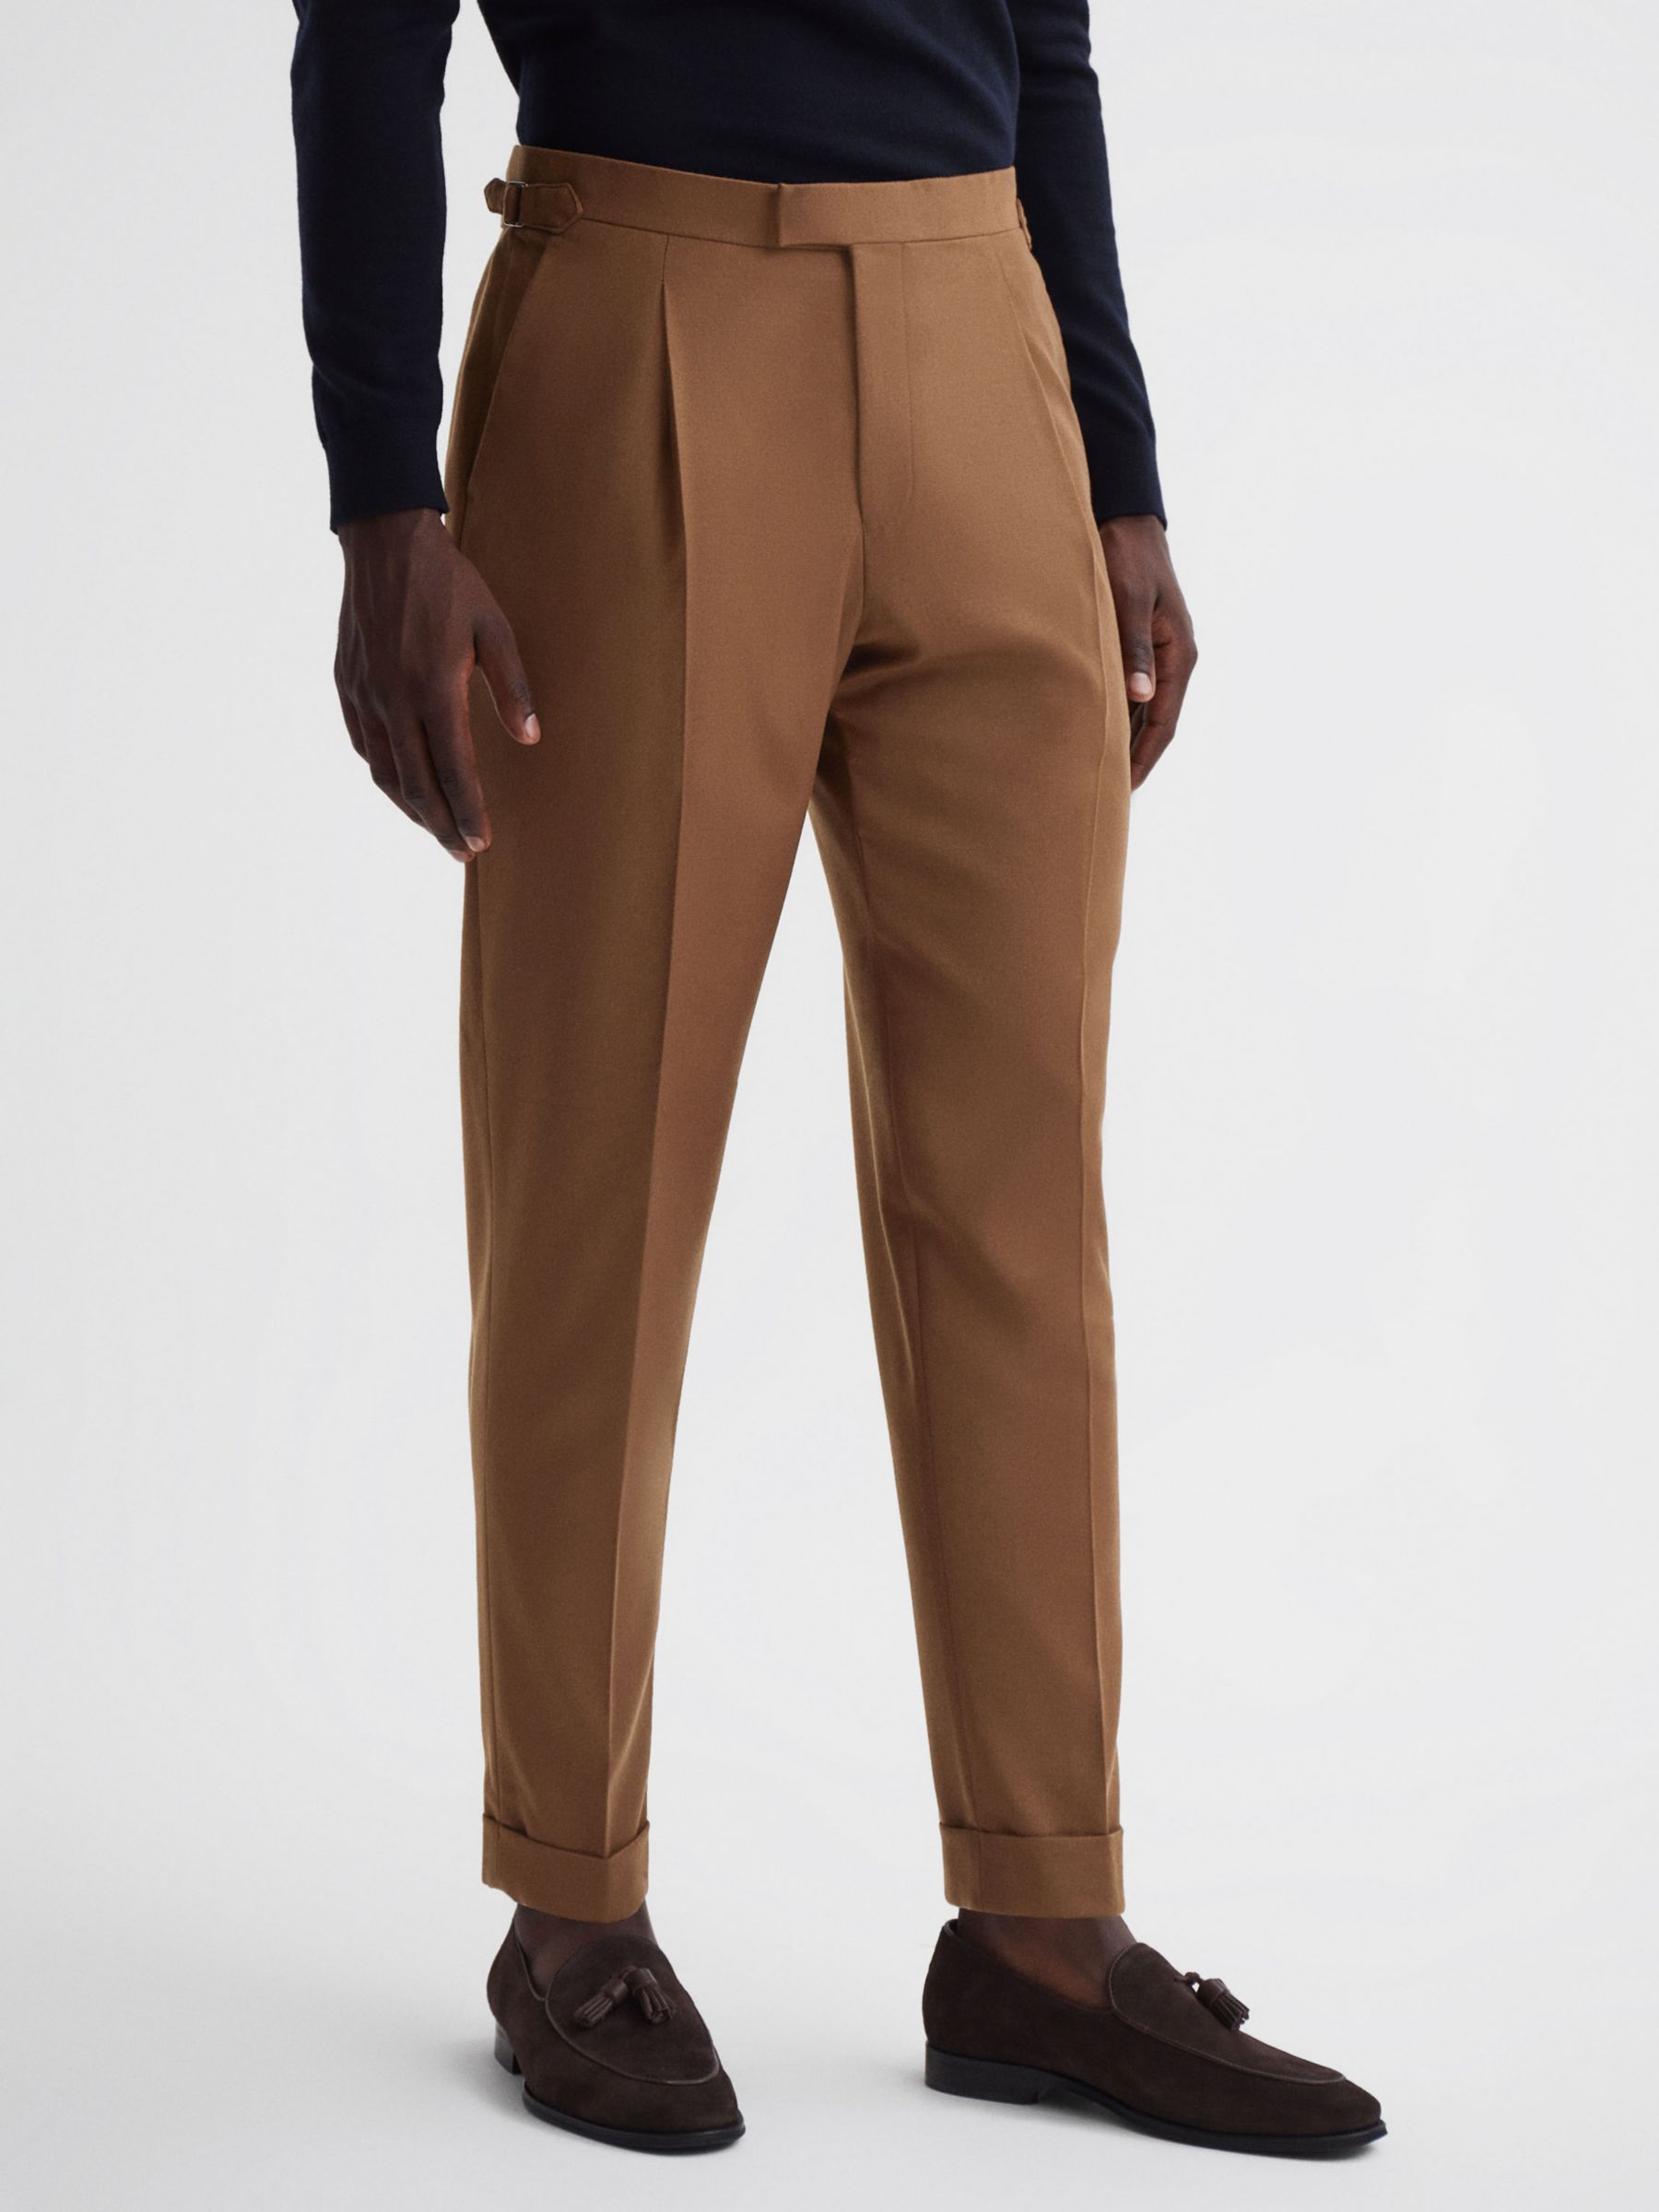 Reiss Venue Flannel Wool Blend Suit Trousers, Tobacco at John Lewis ...